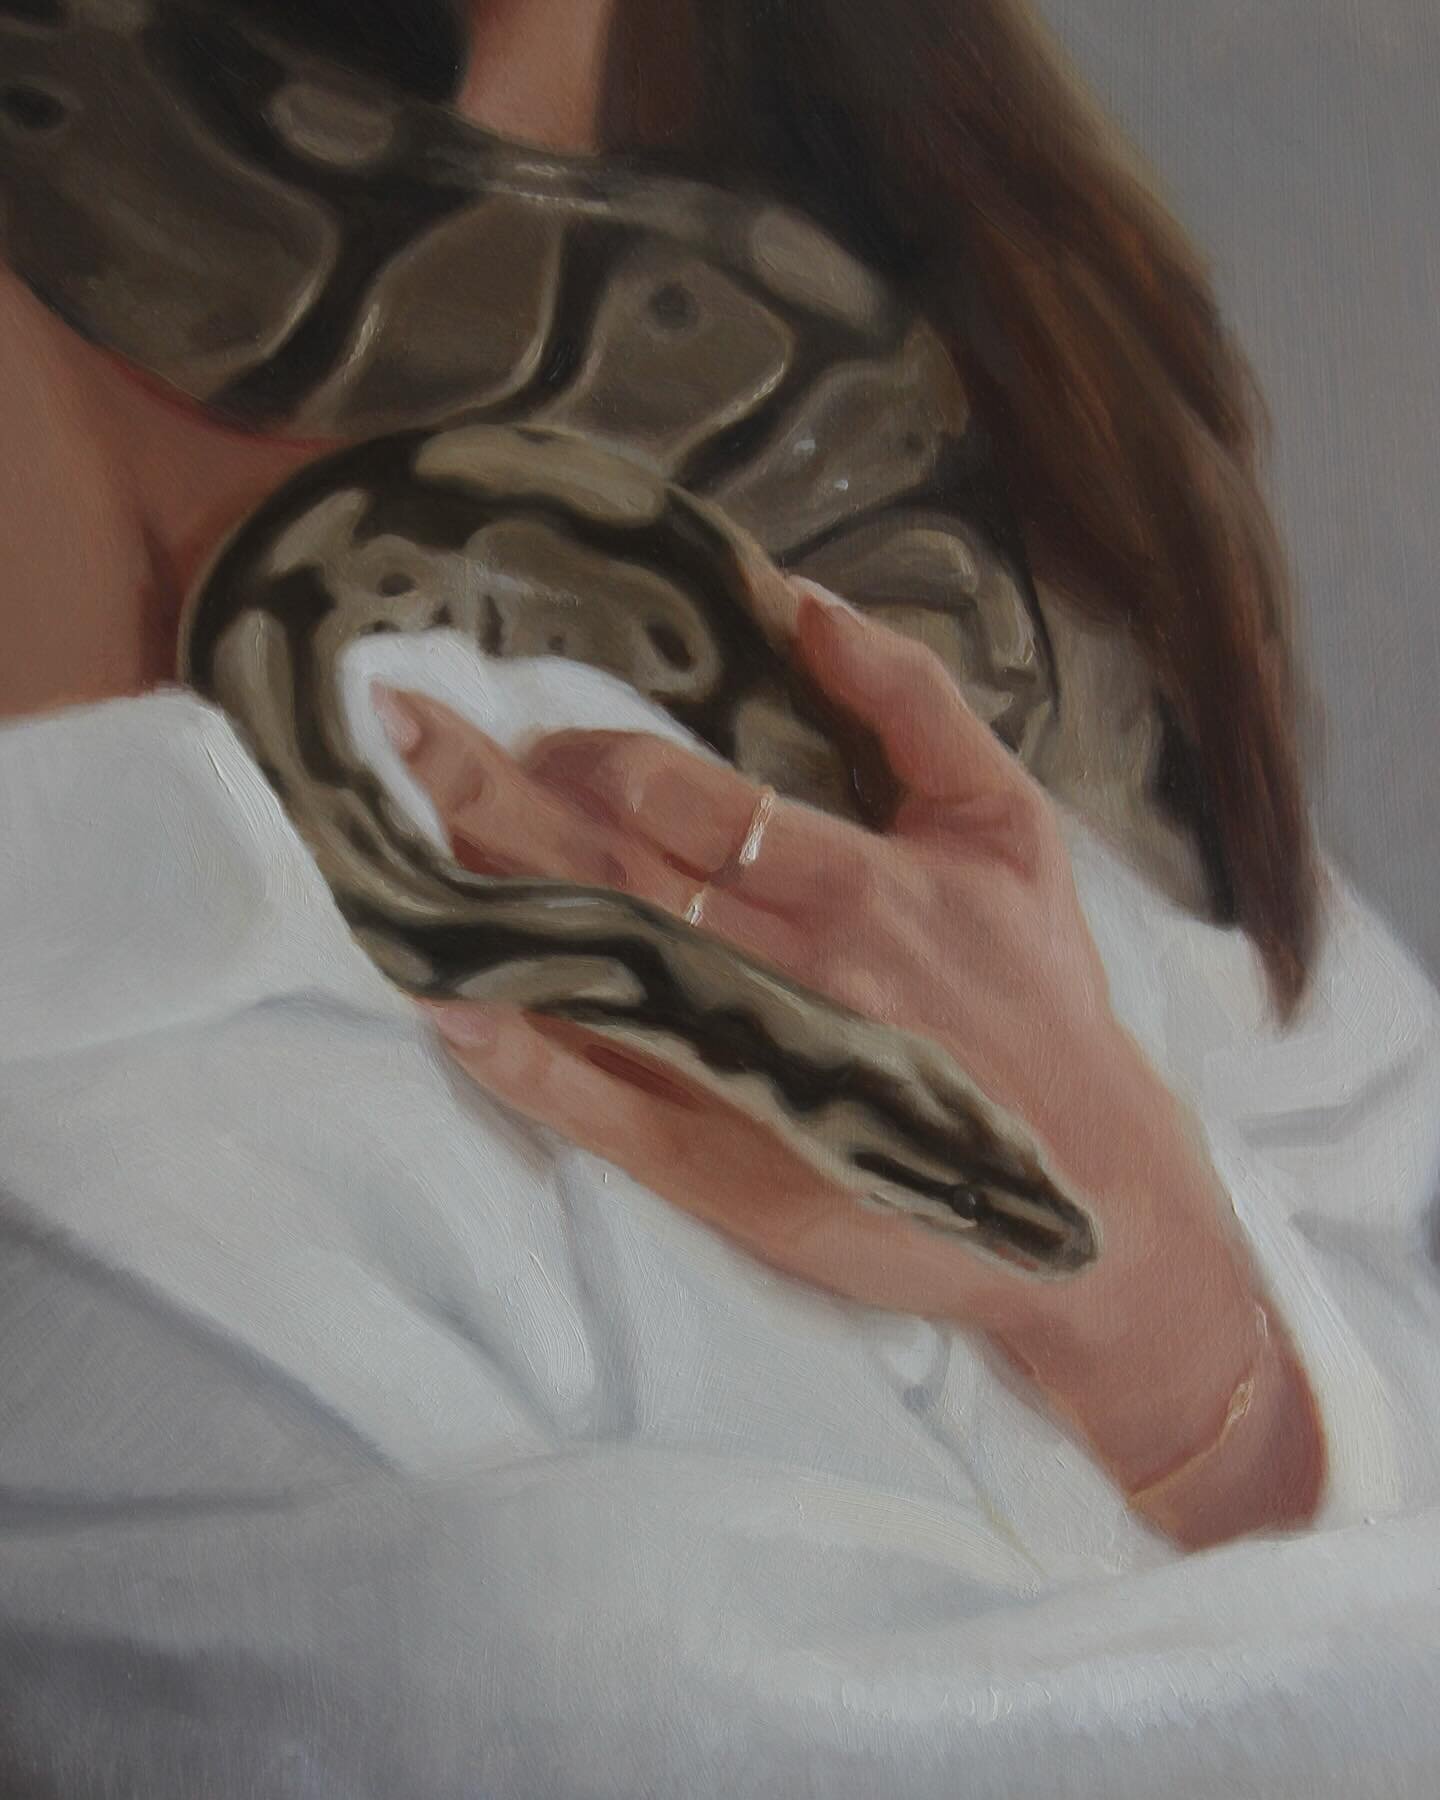 Sneak peak of a new piece that will be showing at a pop up show at @billiswilliams.gallery in LA this week! Opening reception this Saturday, March 30th, 4-8pm. Come say hi! 🐍